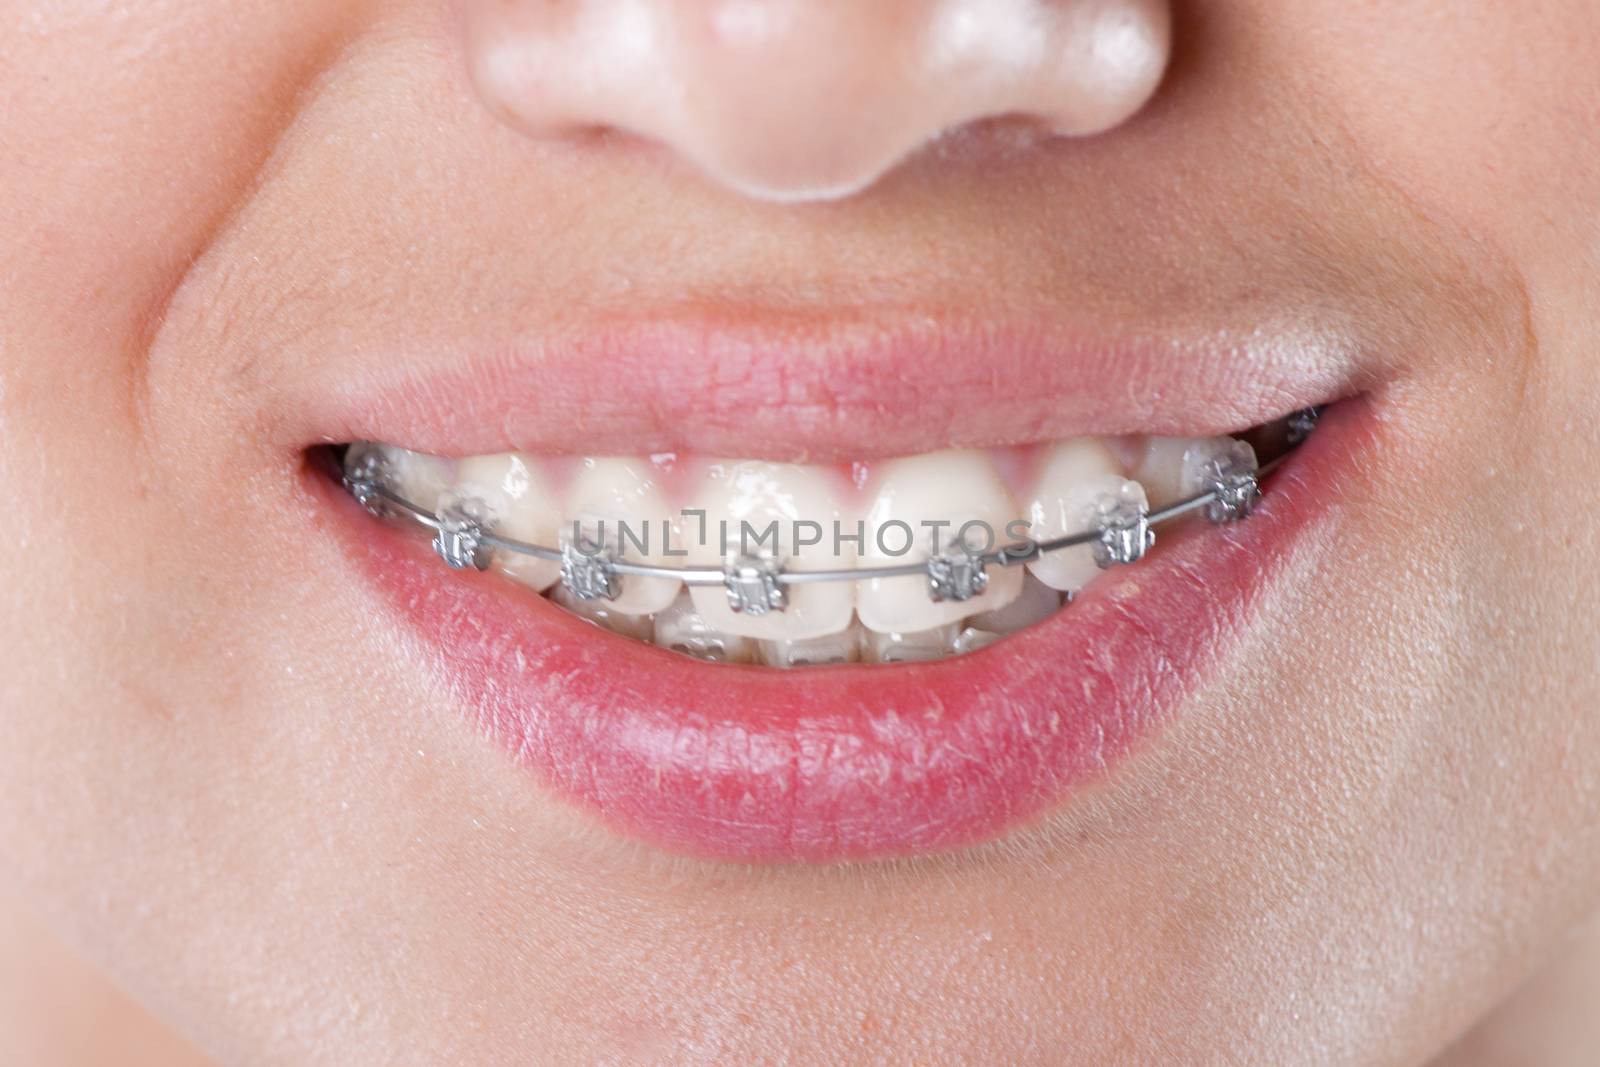 teeth with braces, close up. young woman photo.